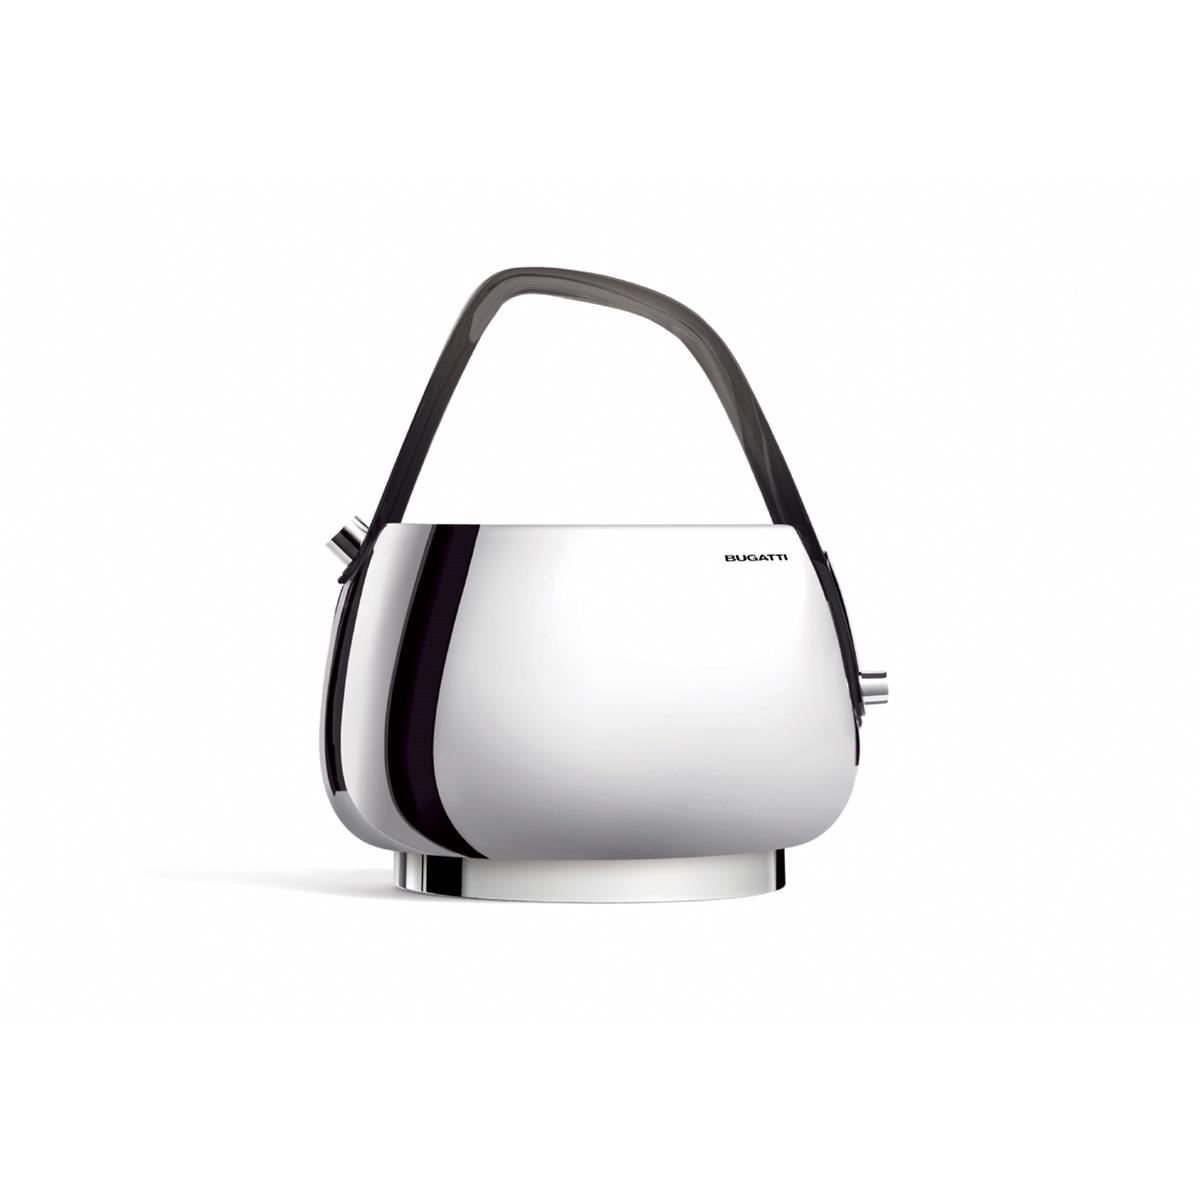 photo jackie - stainless steel electronic kettle with transparent smoked handle